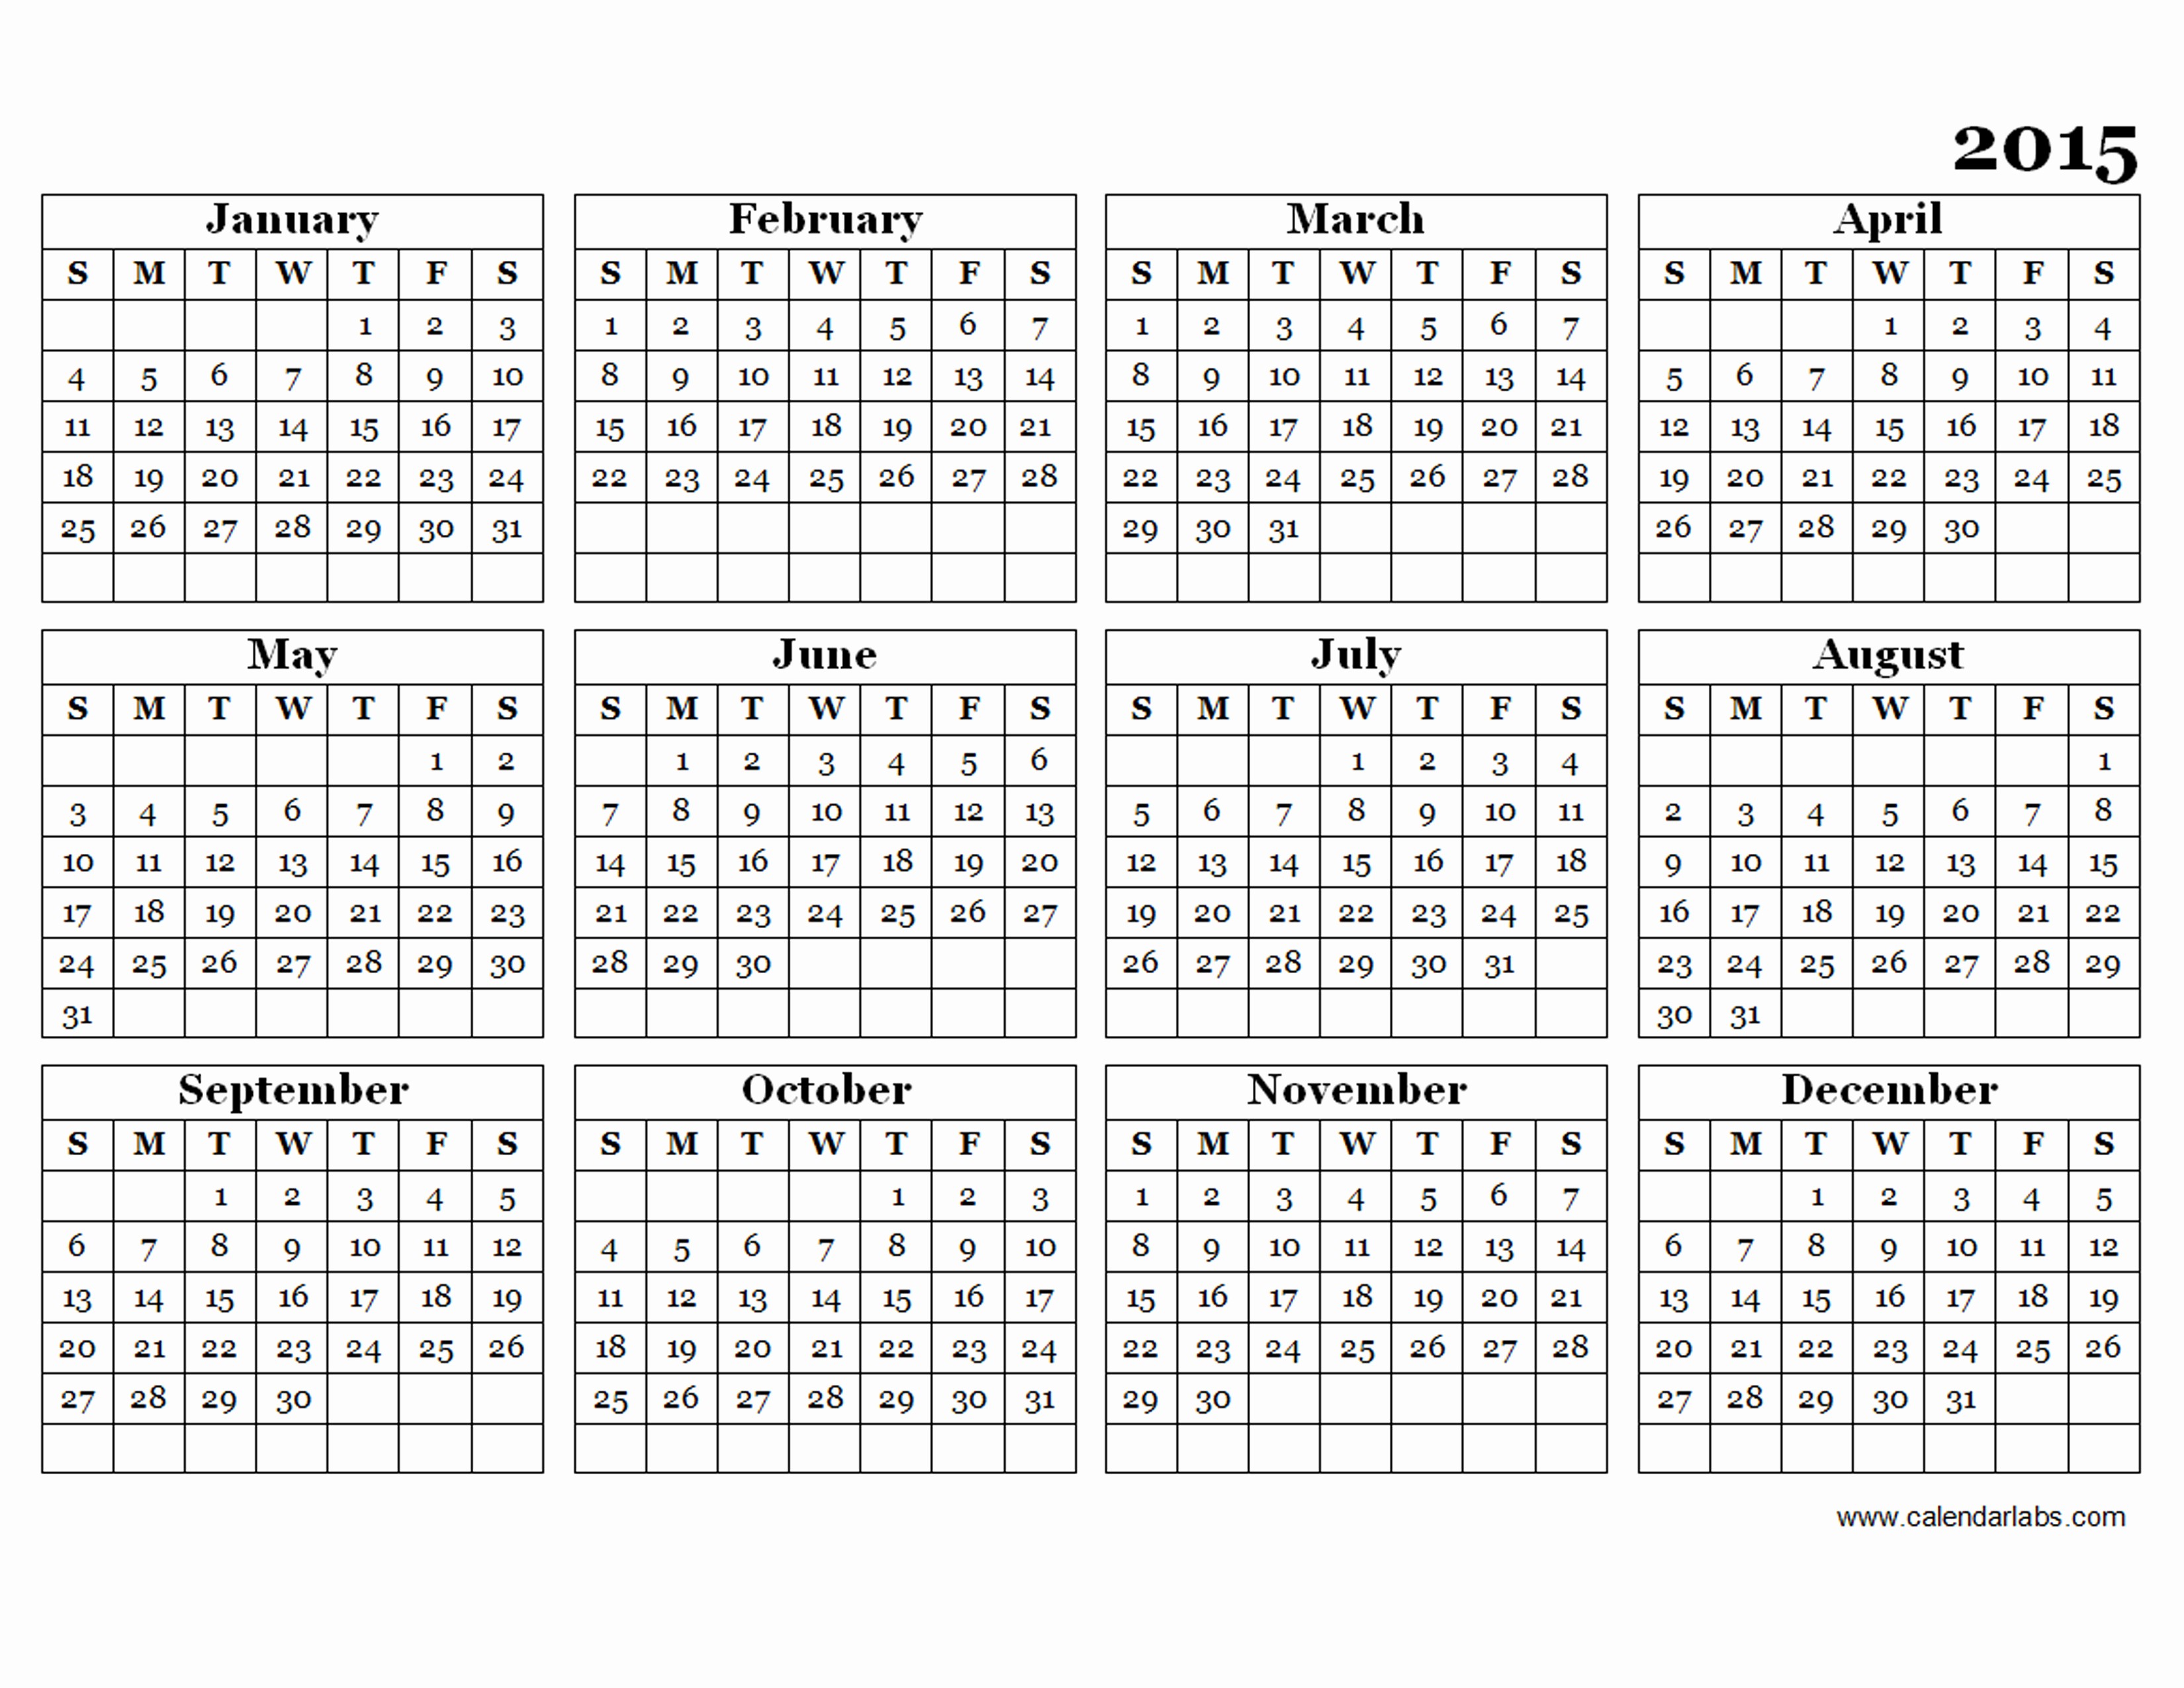 Free Yearly Calendar Templates 2015 Unique 2015 Yearly Calendar Template 09 Free Printable Templates